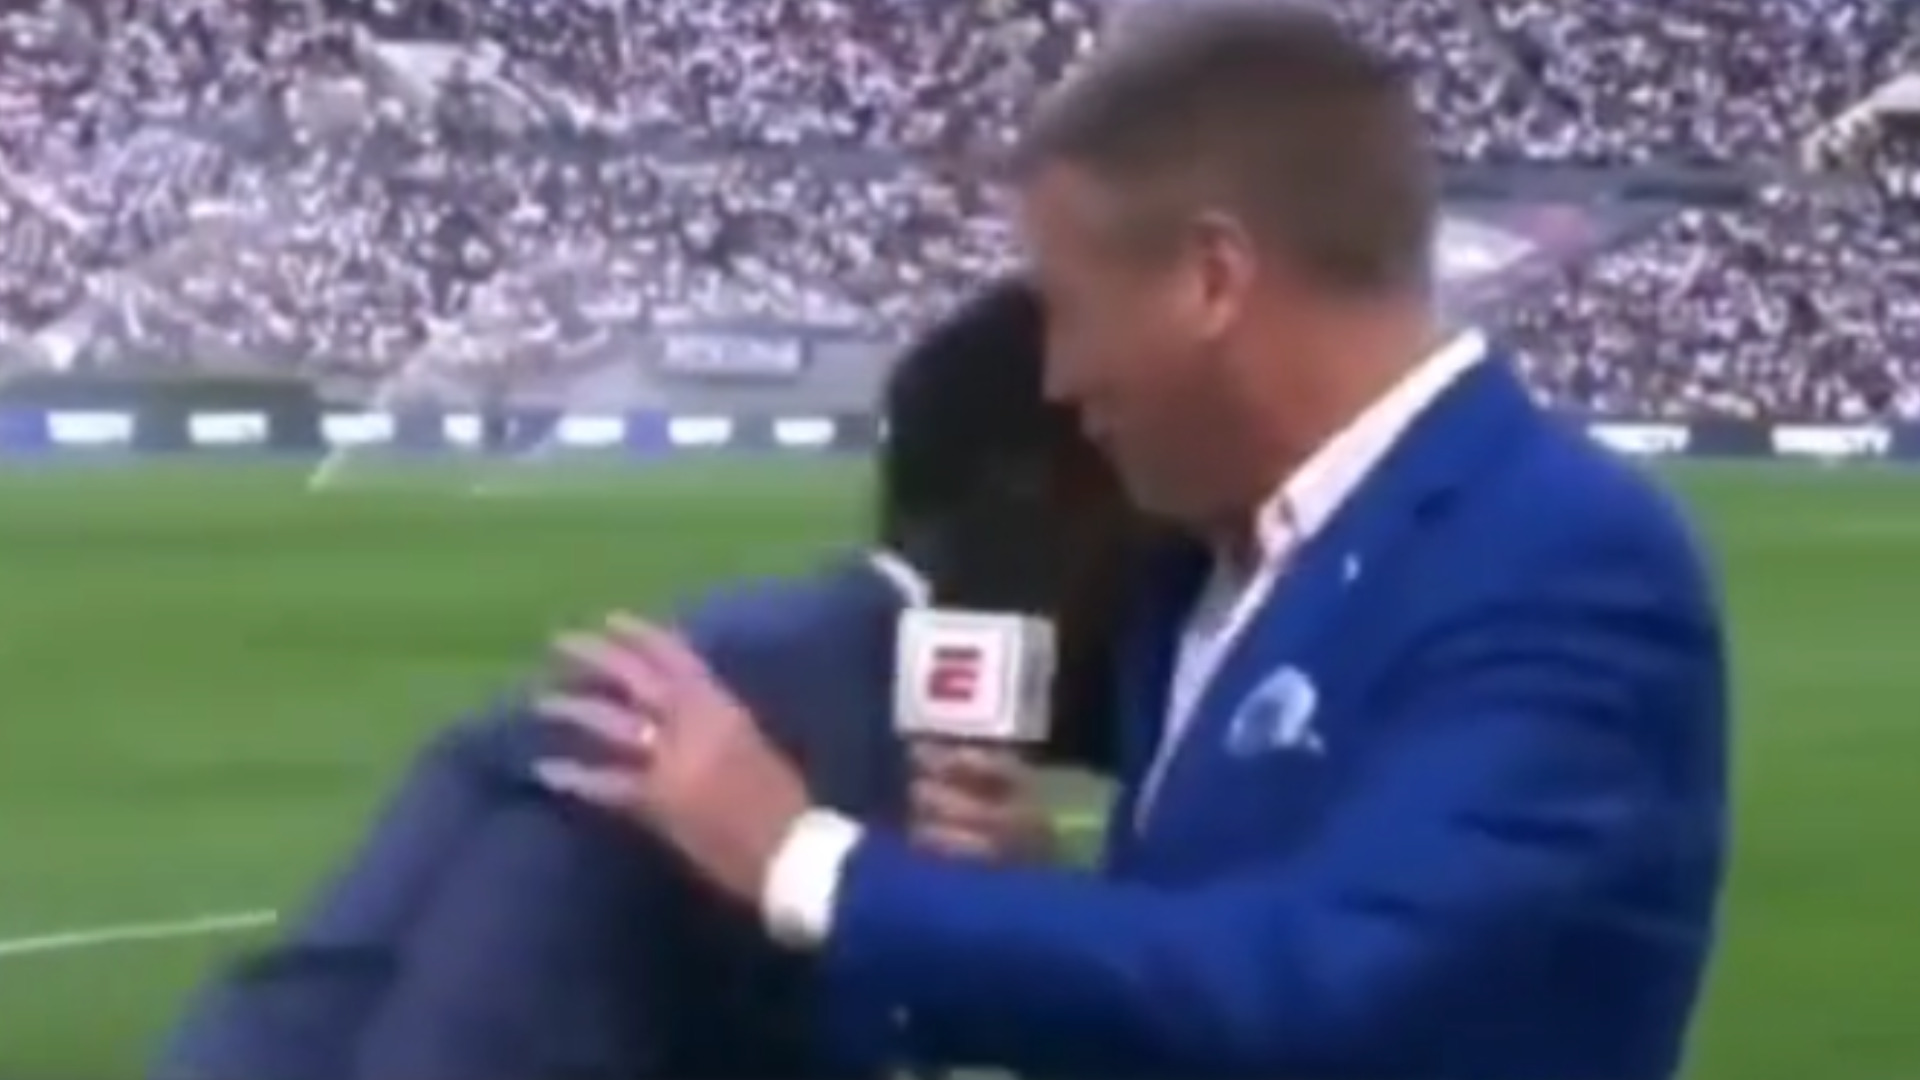 ESPN’s football analyst suddenly collapses on live television